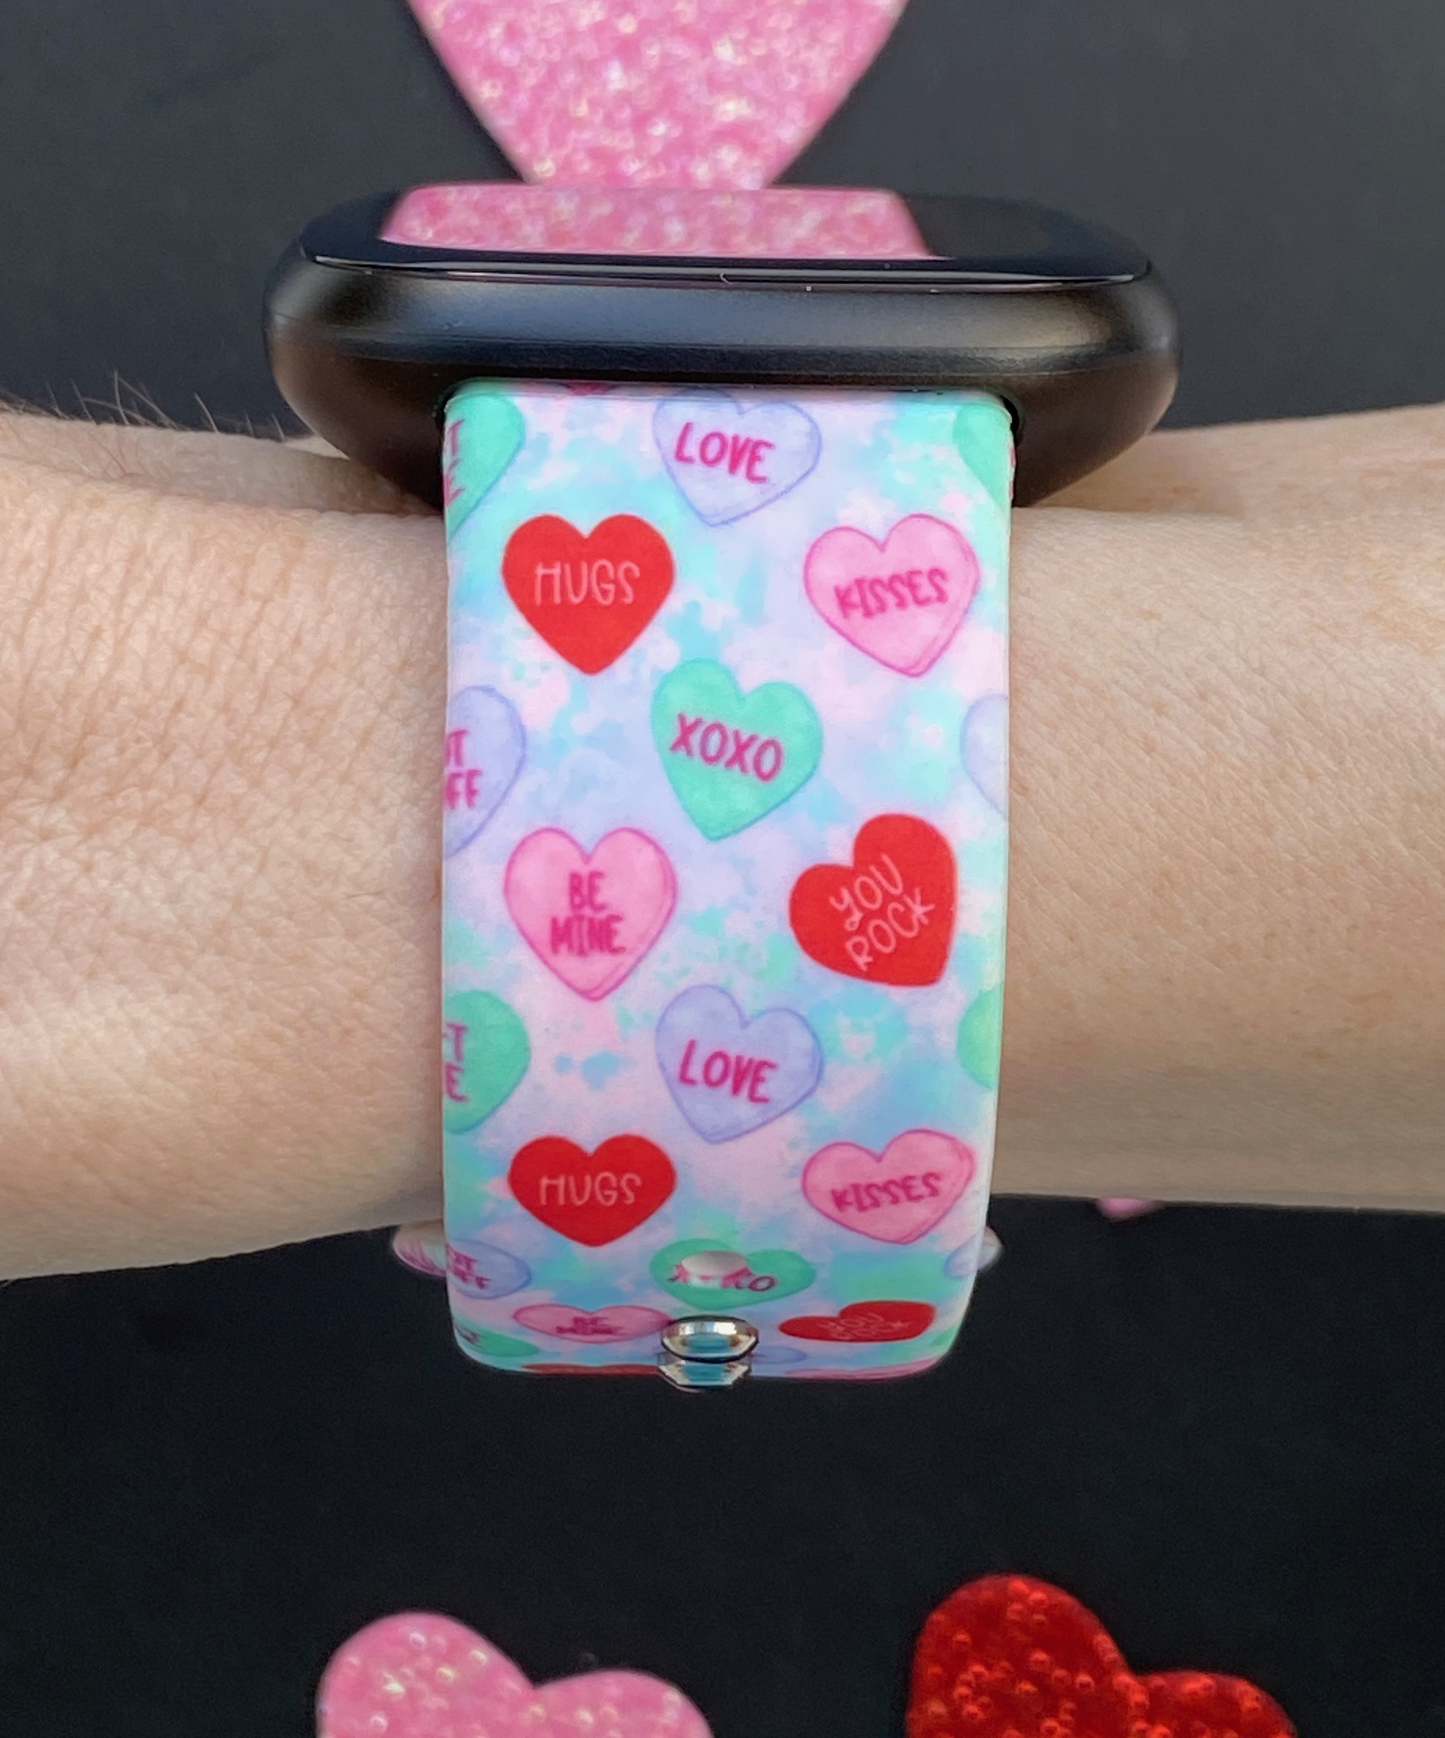 Candy Hearts Fitbit Versa 1/2 Watch Band